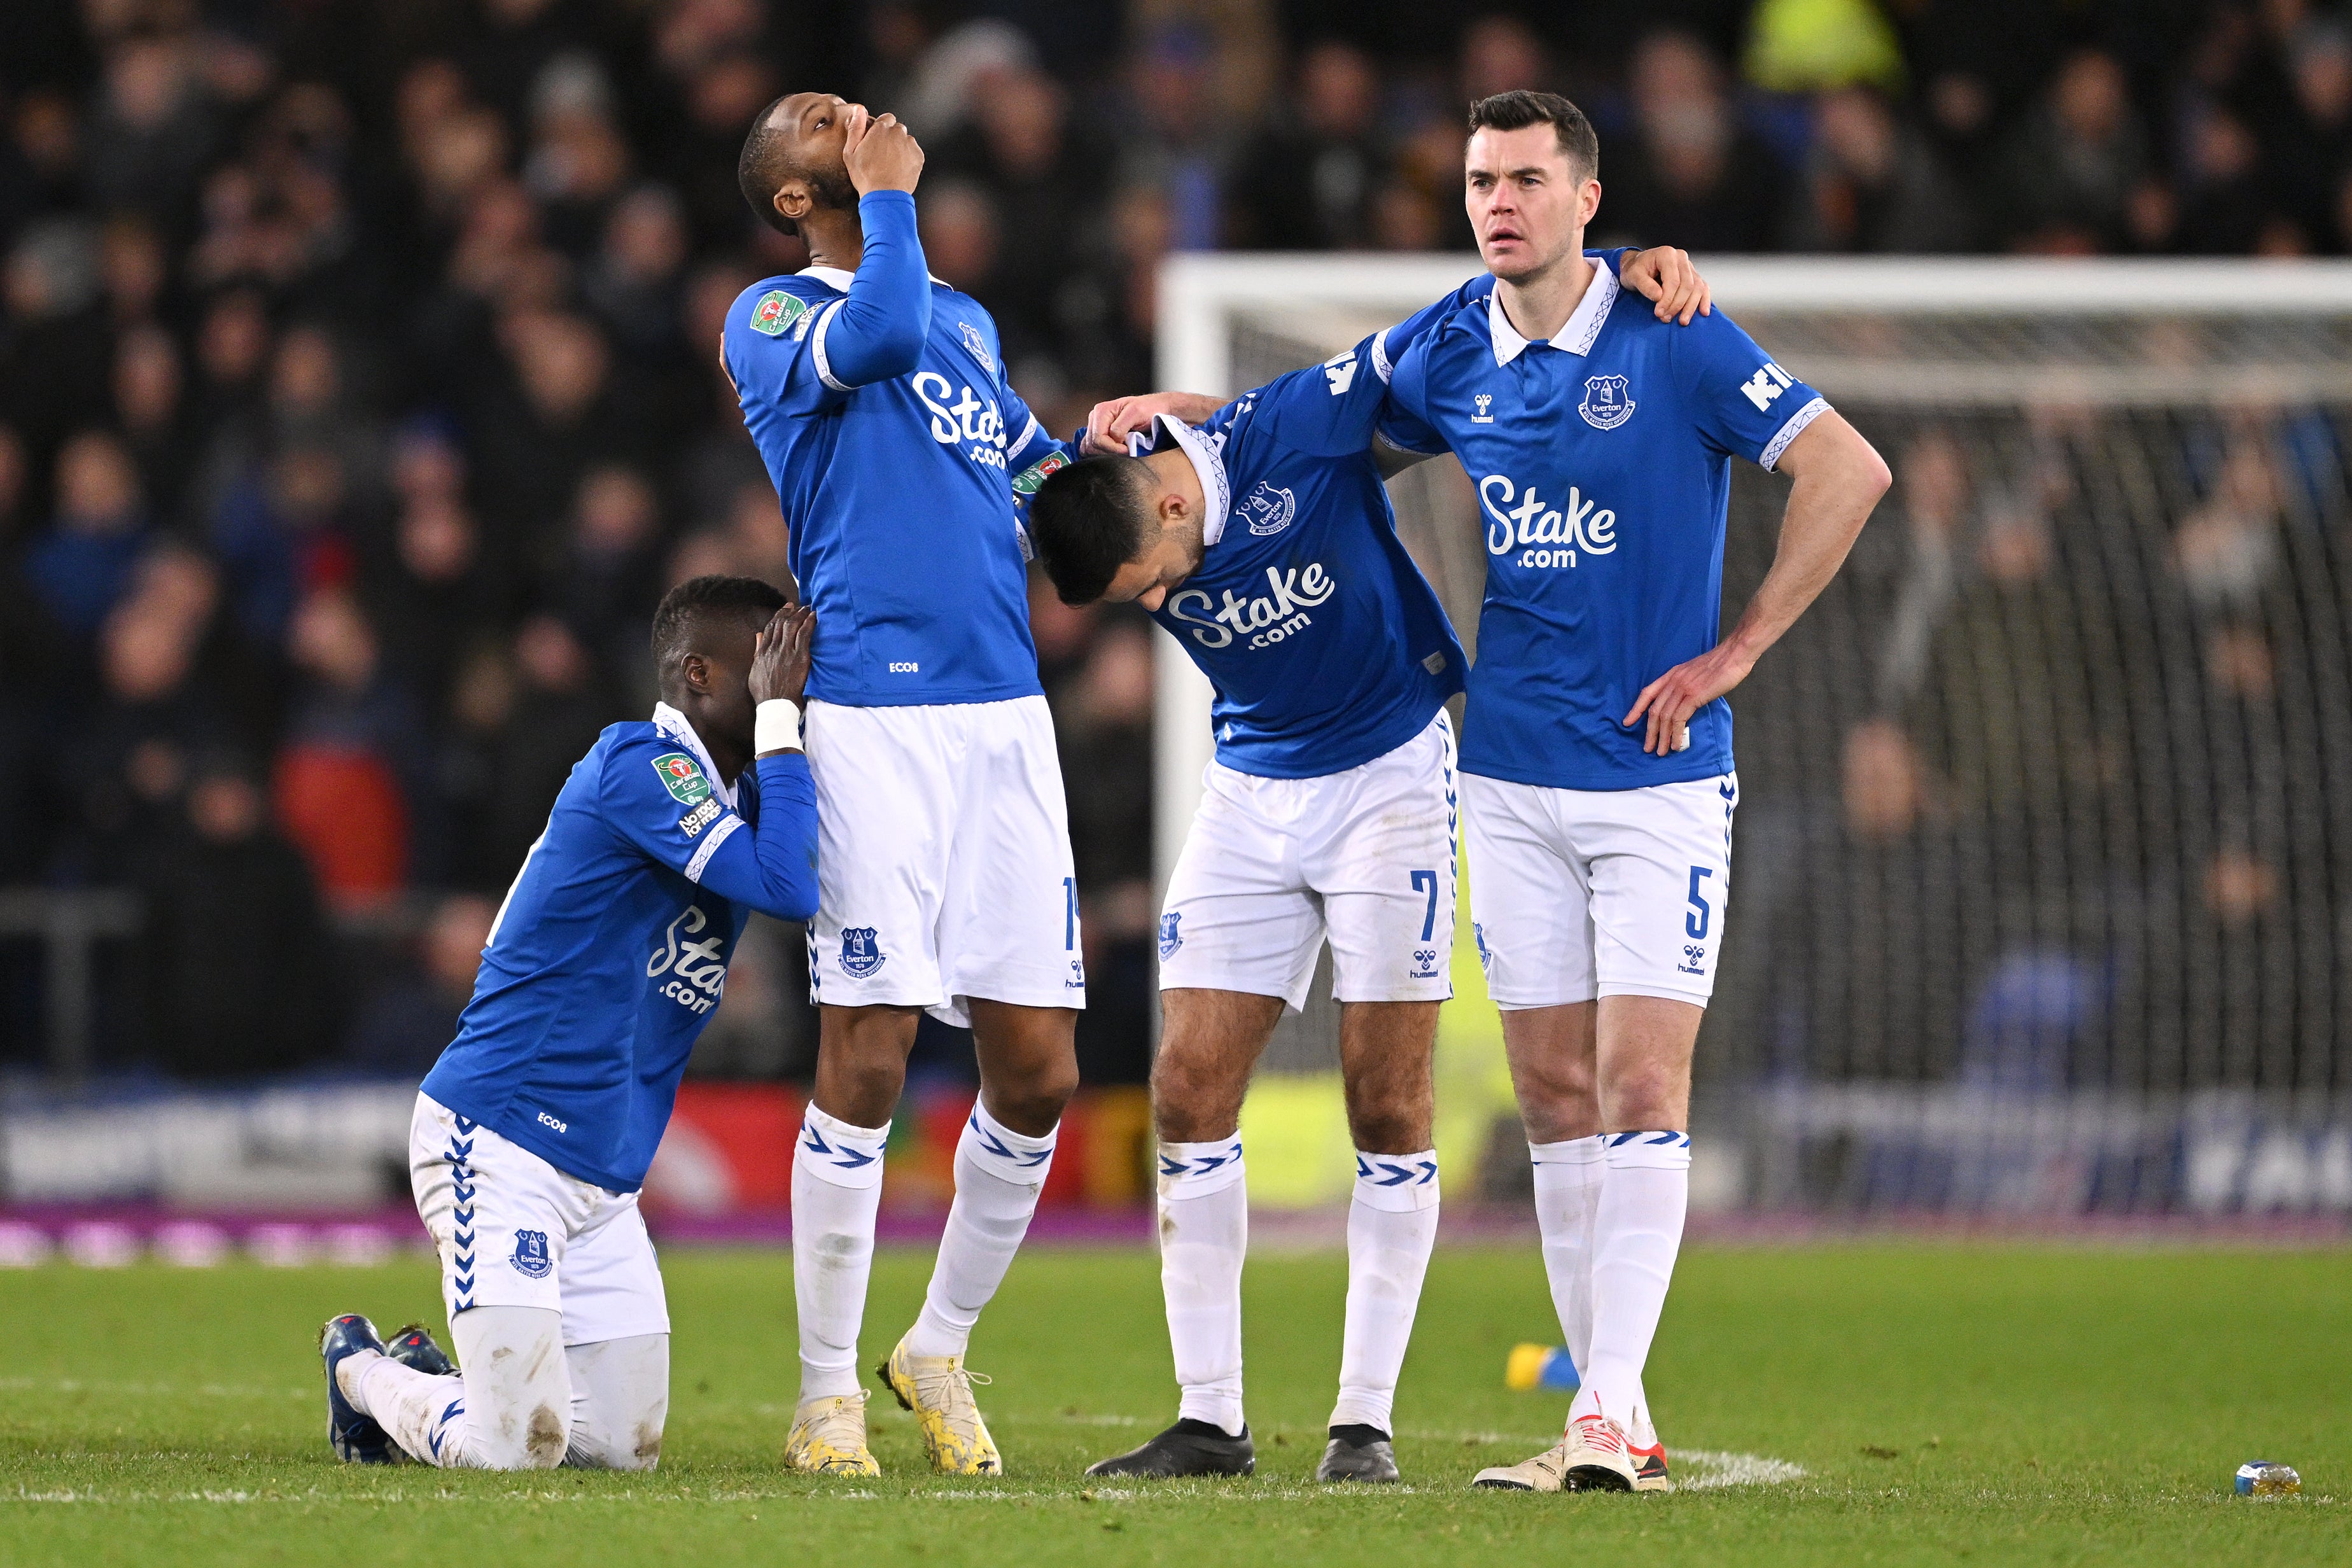 Everton’s wait for silverware continues